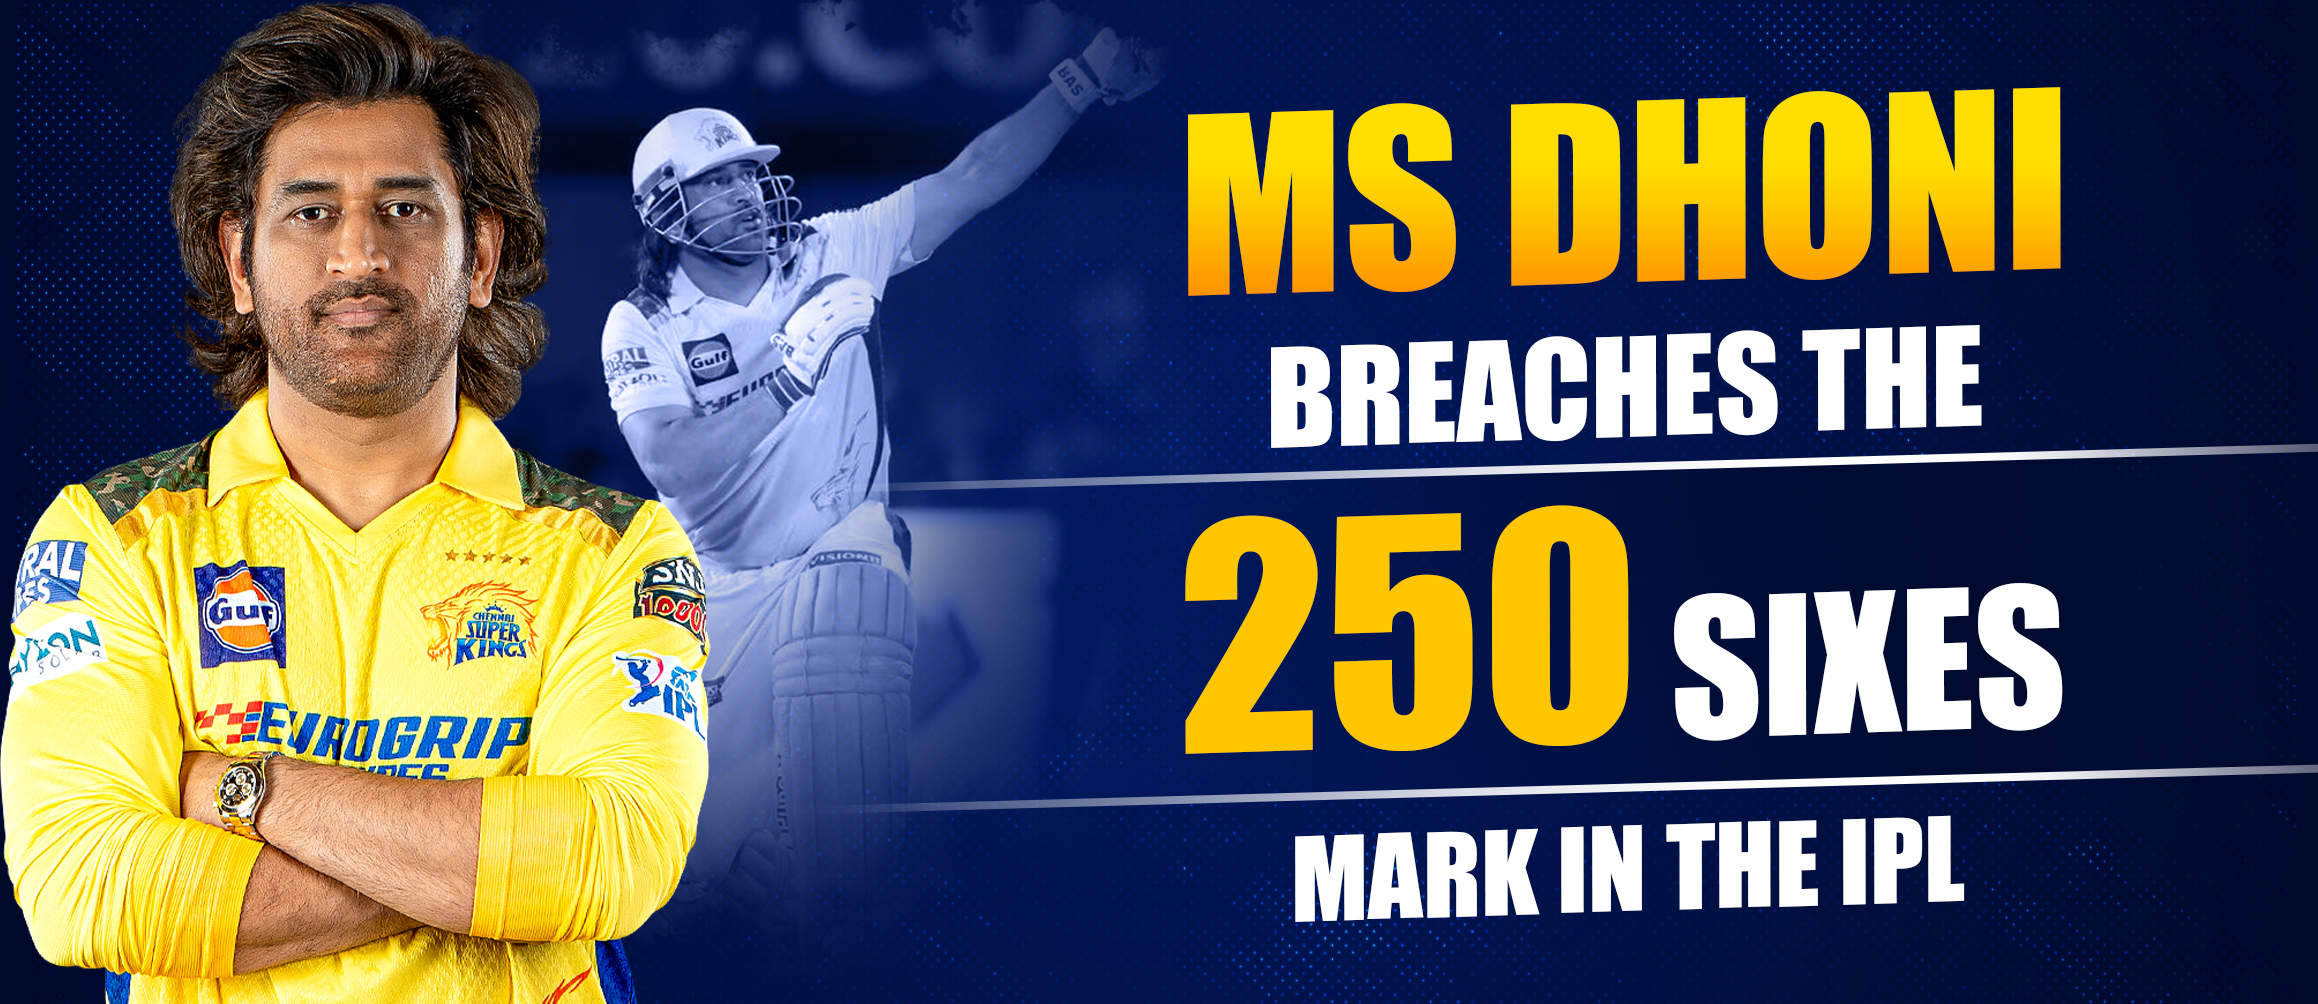 MS Dhoni Breaches The 250 Sixes Mark in the IPL